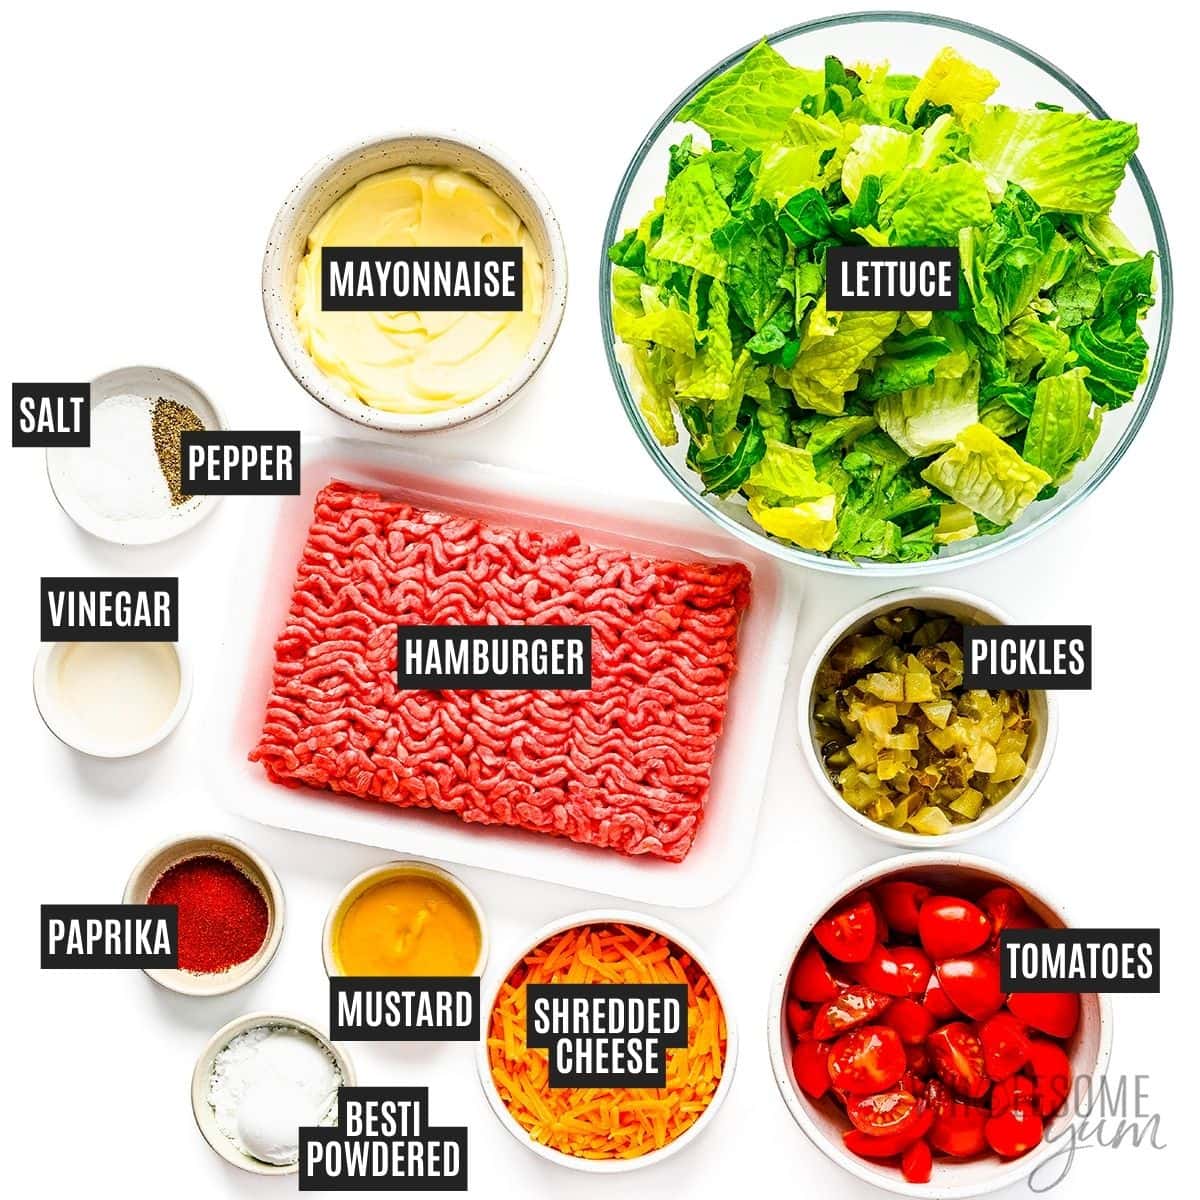 Lettuce, ground beef, and other recipe ingredients in individual bowls.